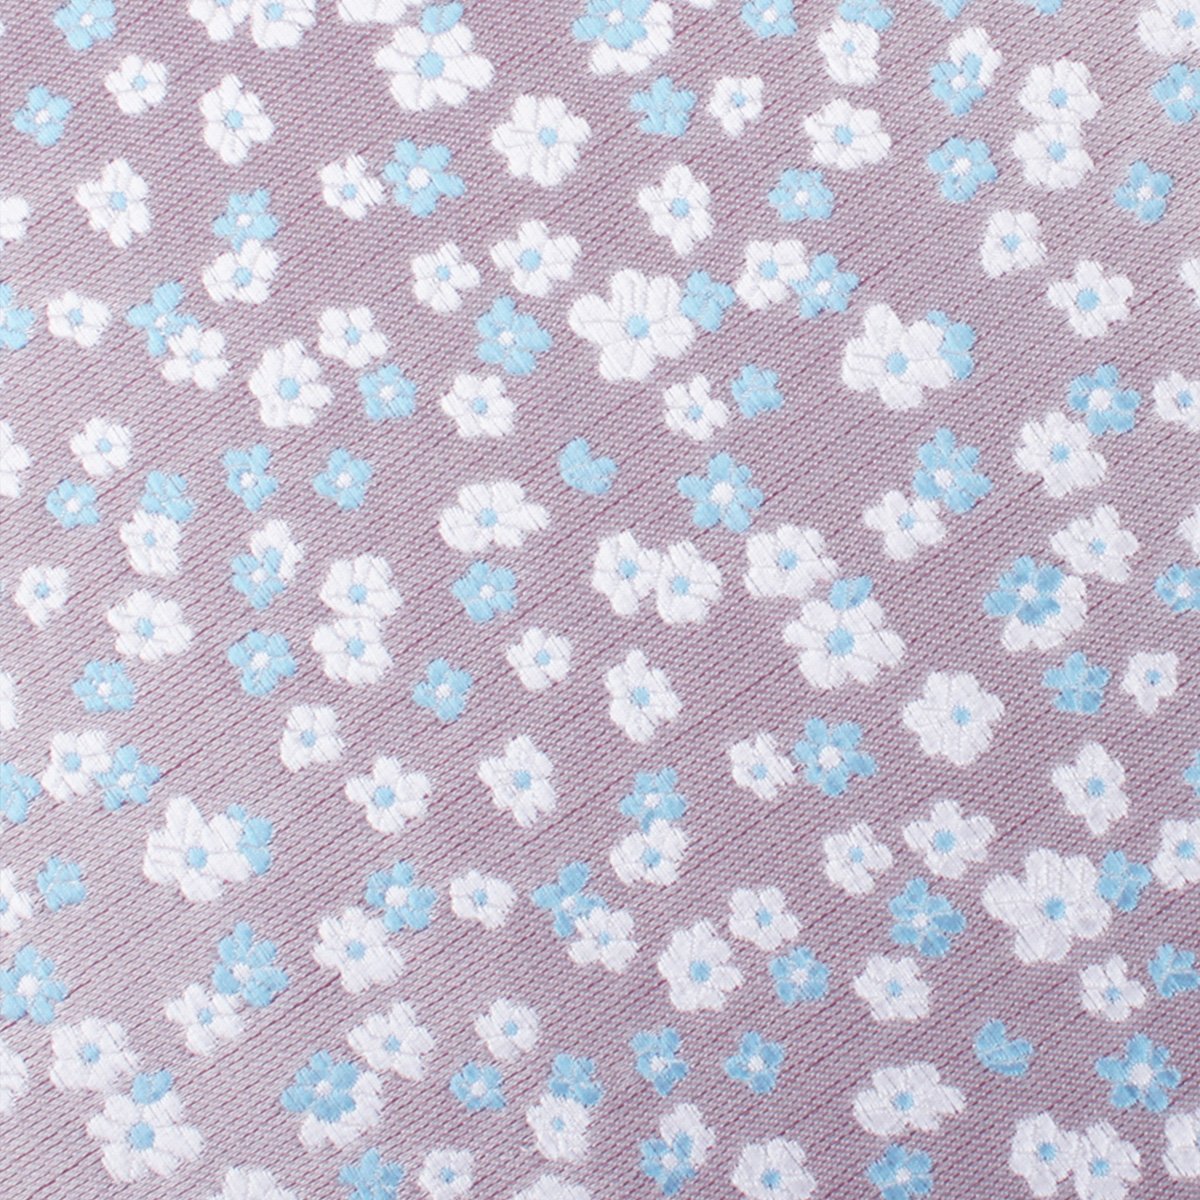 Miharashi Seaside Blue and White Floral Skinny Tie Fabric